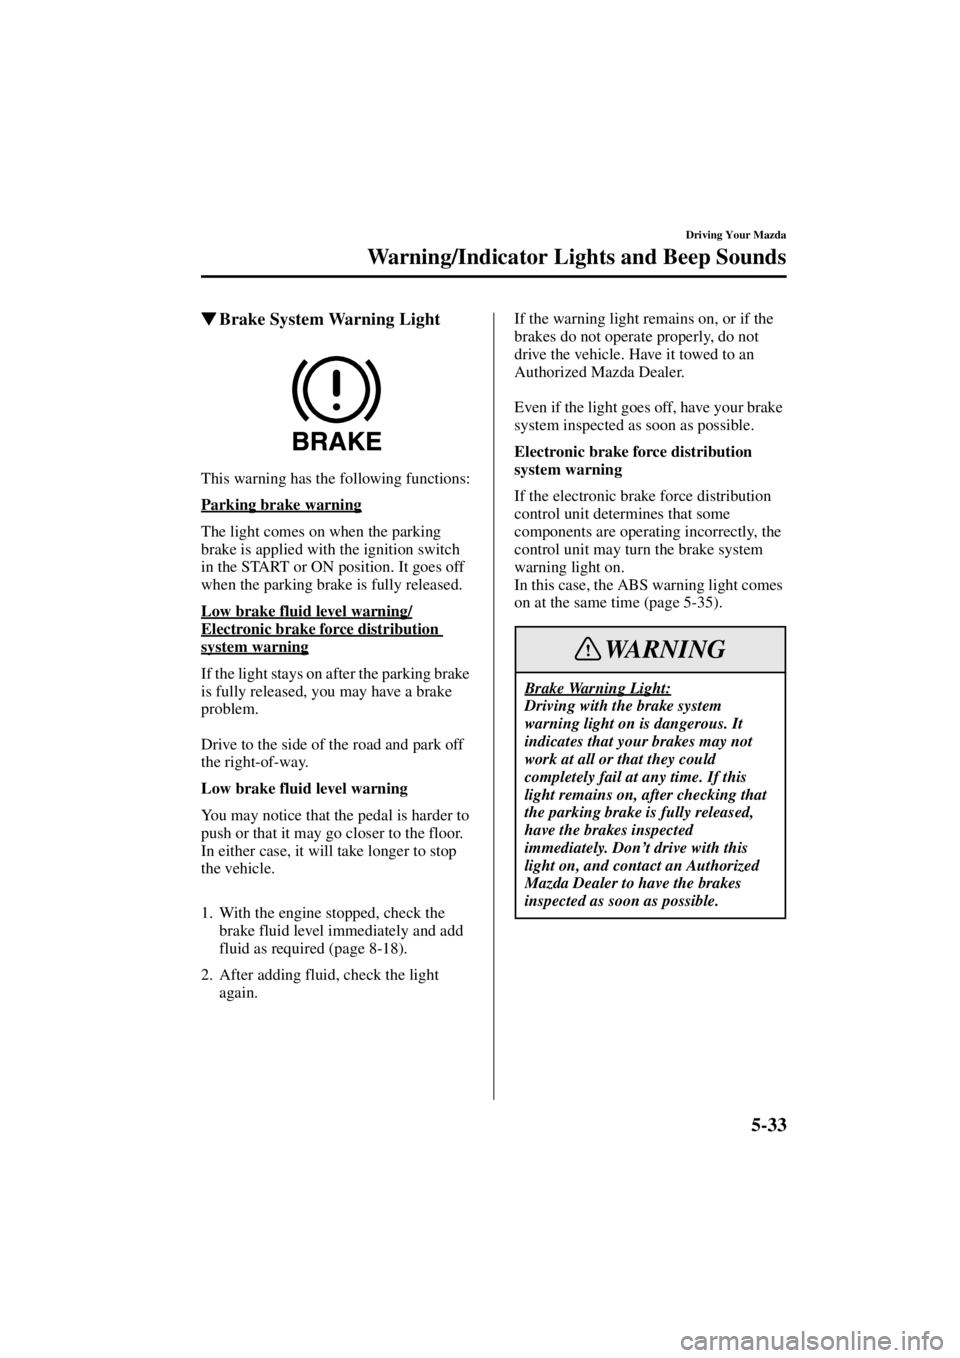 MAZDA MODEL 3 5-DOOR 2004 User Guide 5-33
Driving Your Mazda
Warning/Indicator Lights and Beep Sounds
Form No. 8S18-EA-03I
Brake System Warning Light
This warning has the following functions:
Parking brake warning
The light comes on whe